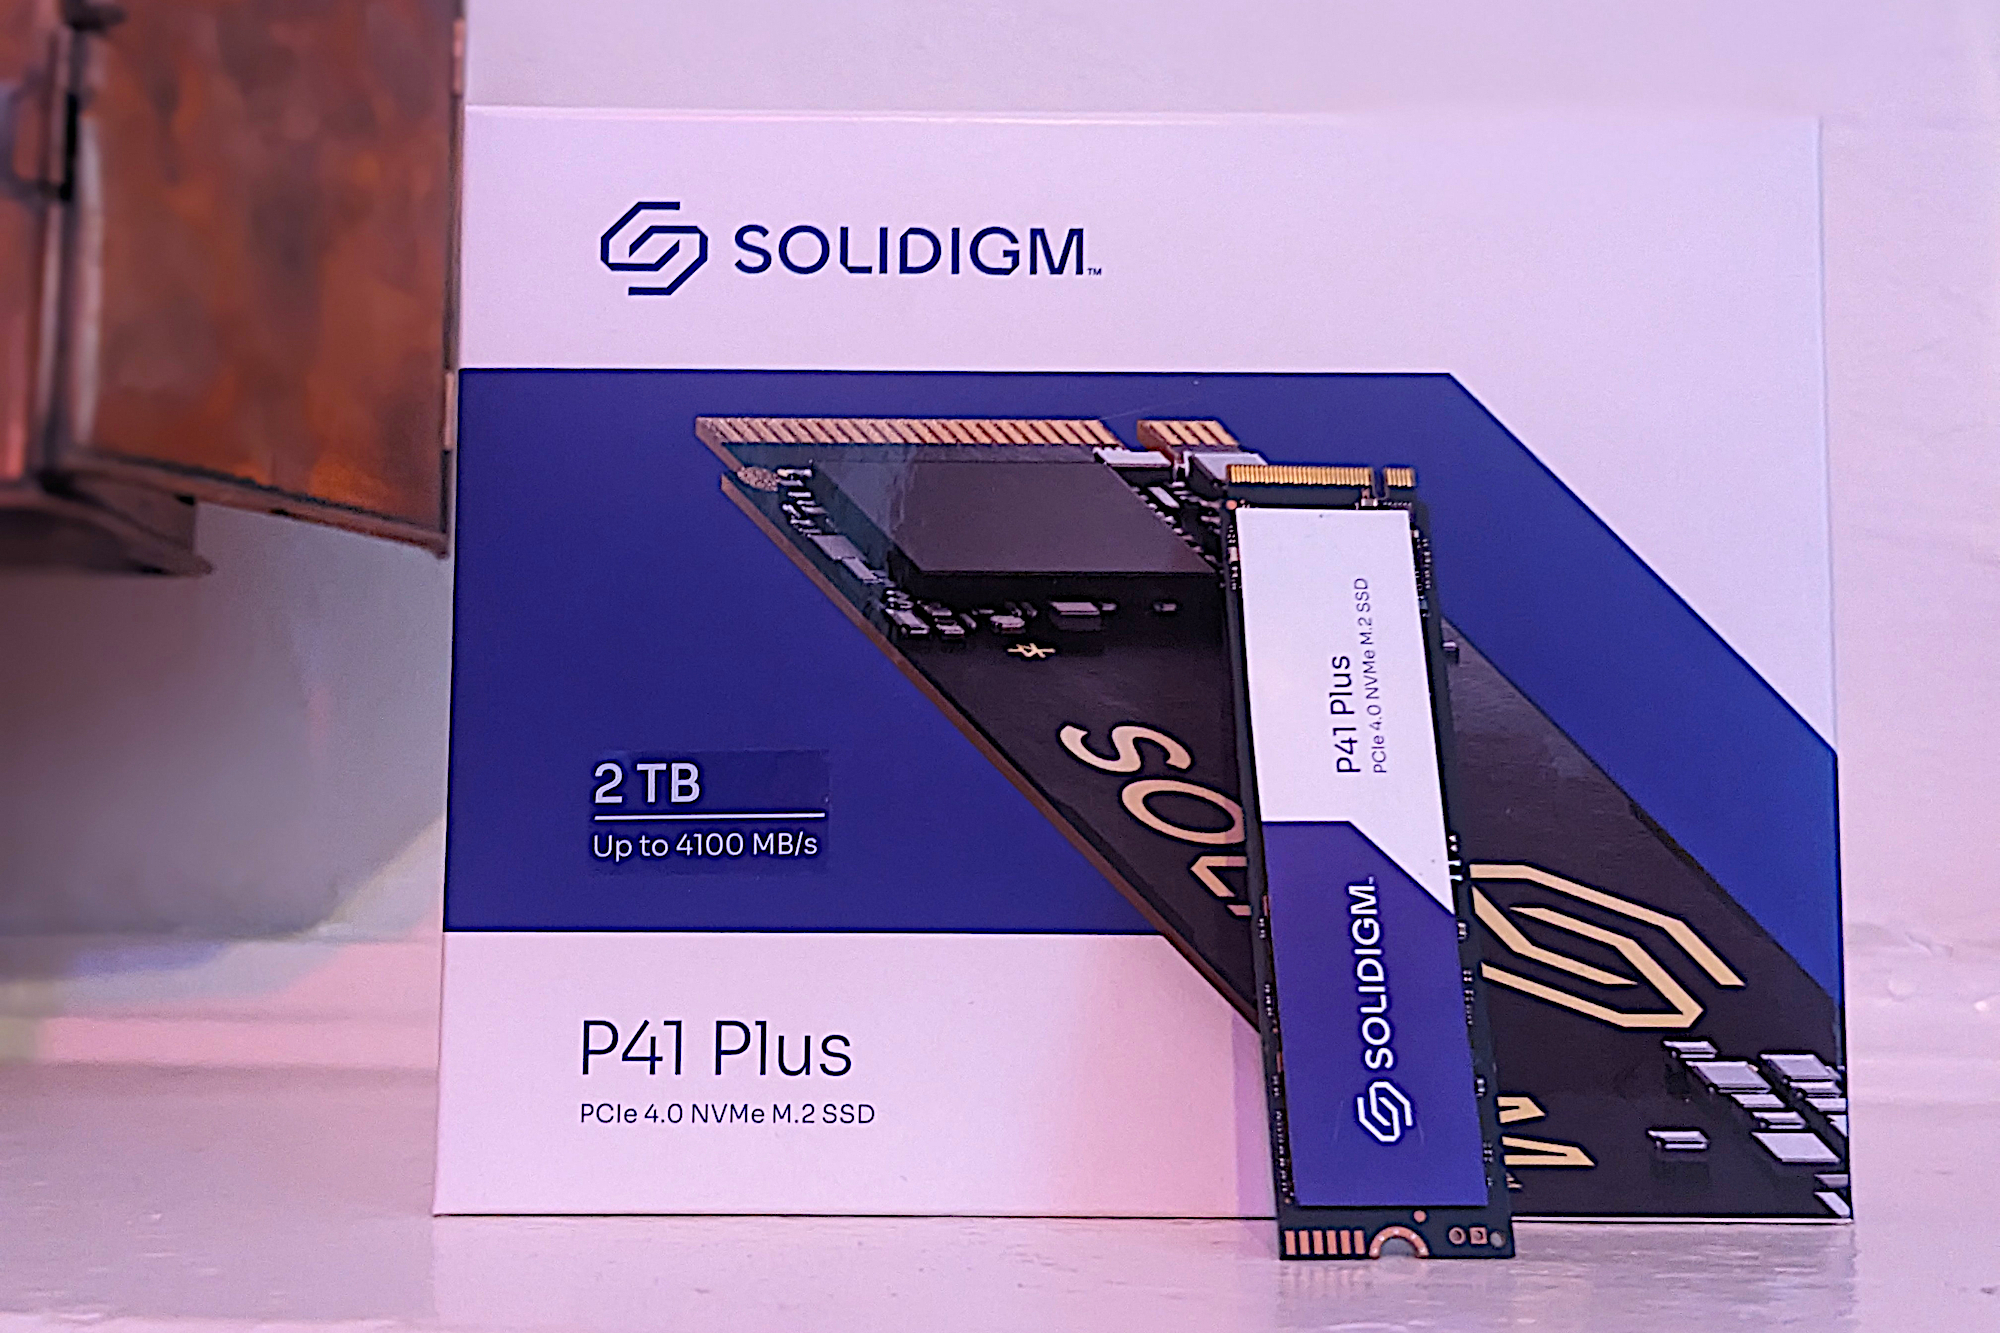 Solidigm P41 Plus - Best budget PCIe 4.0 SSD runner-up 